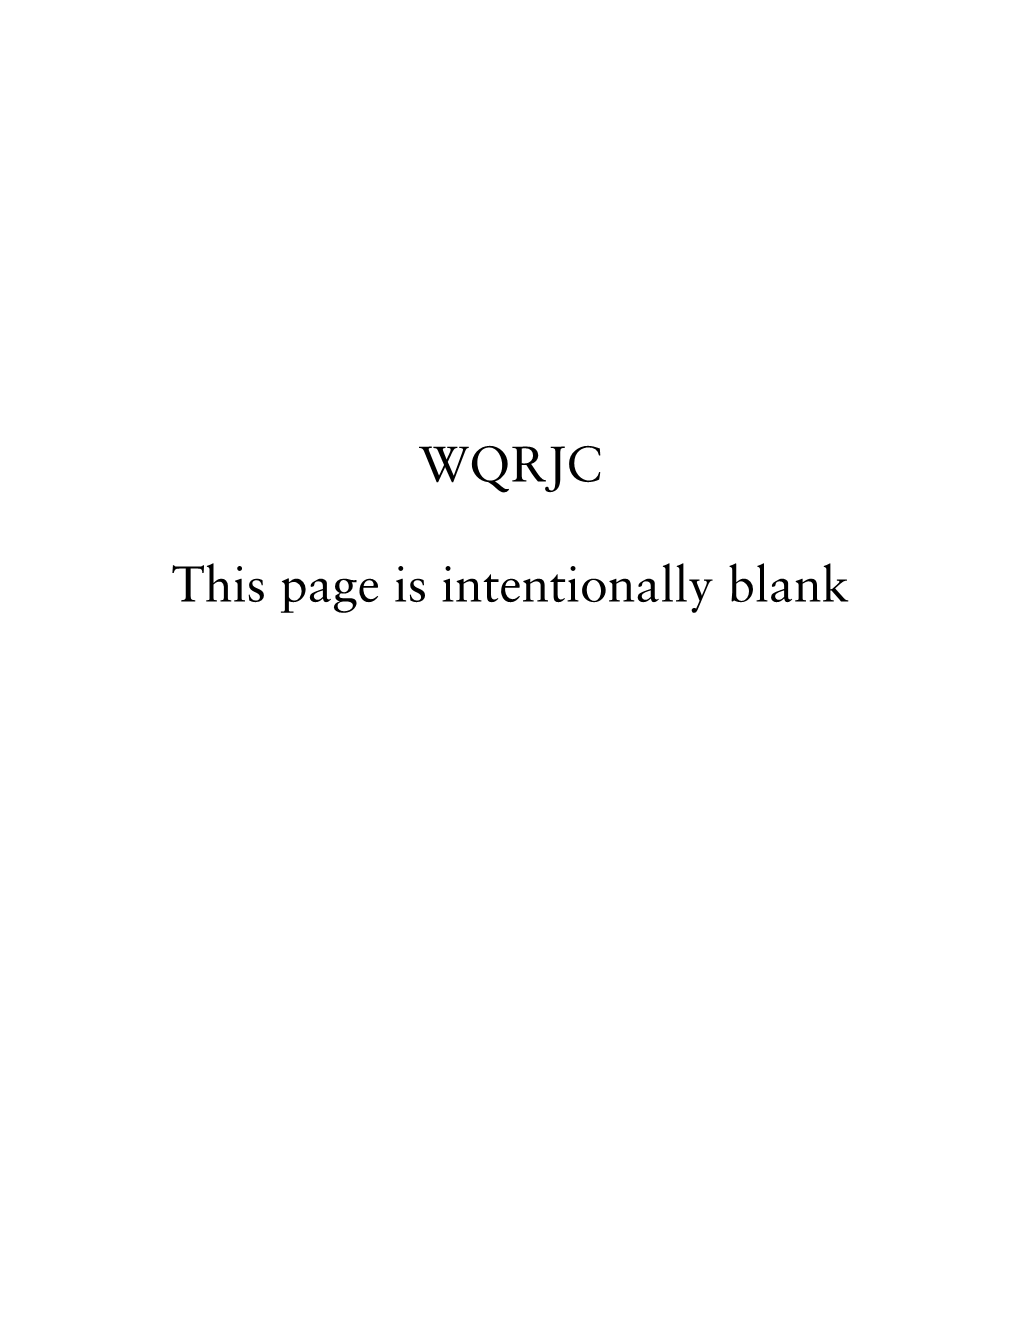 WQRJC This Page Is Intentionally Blank